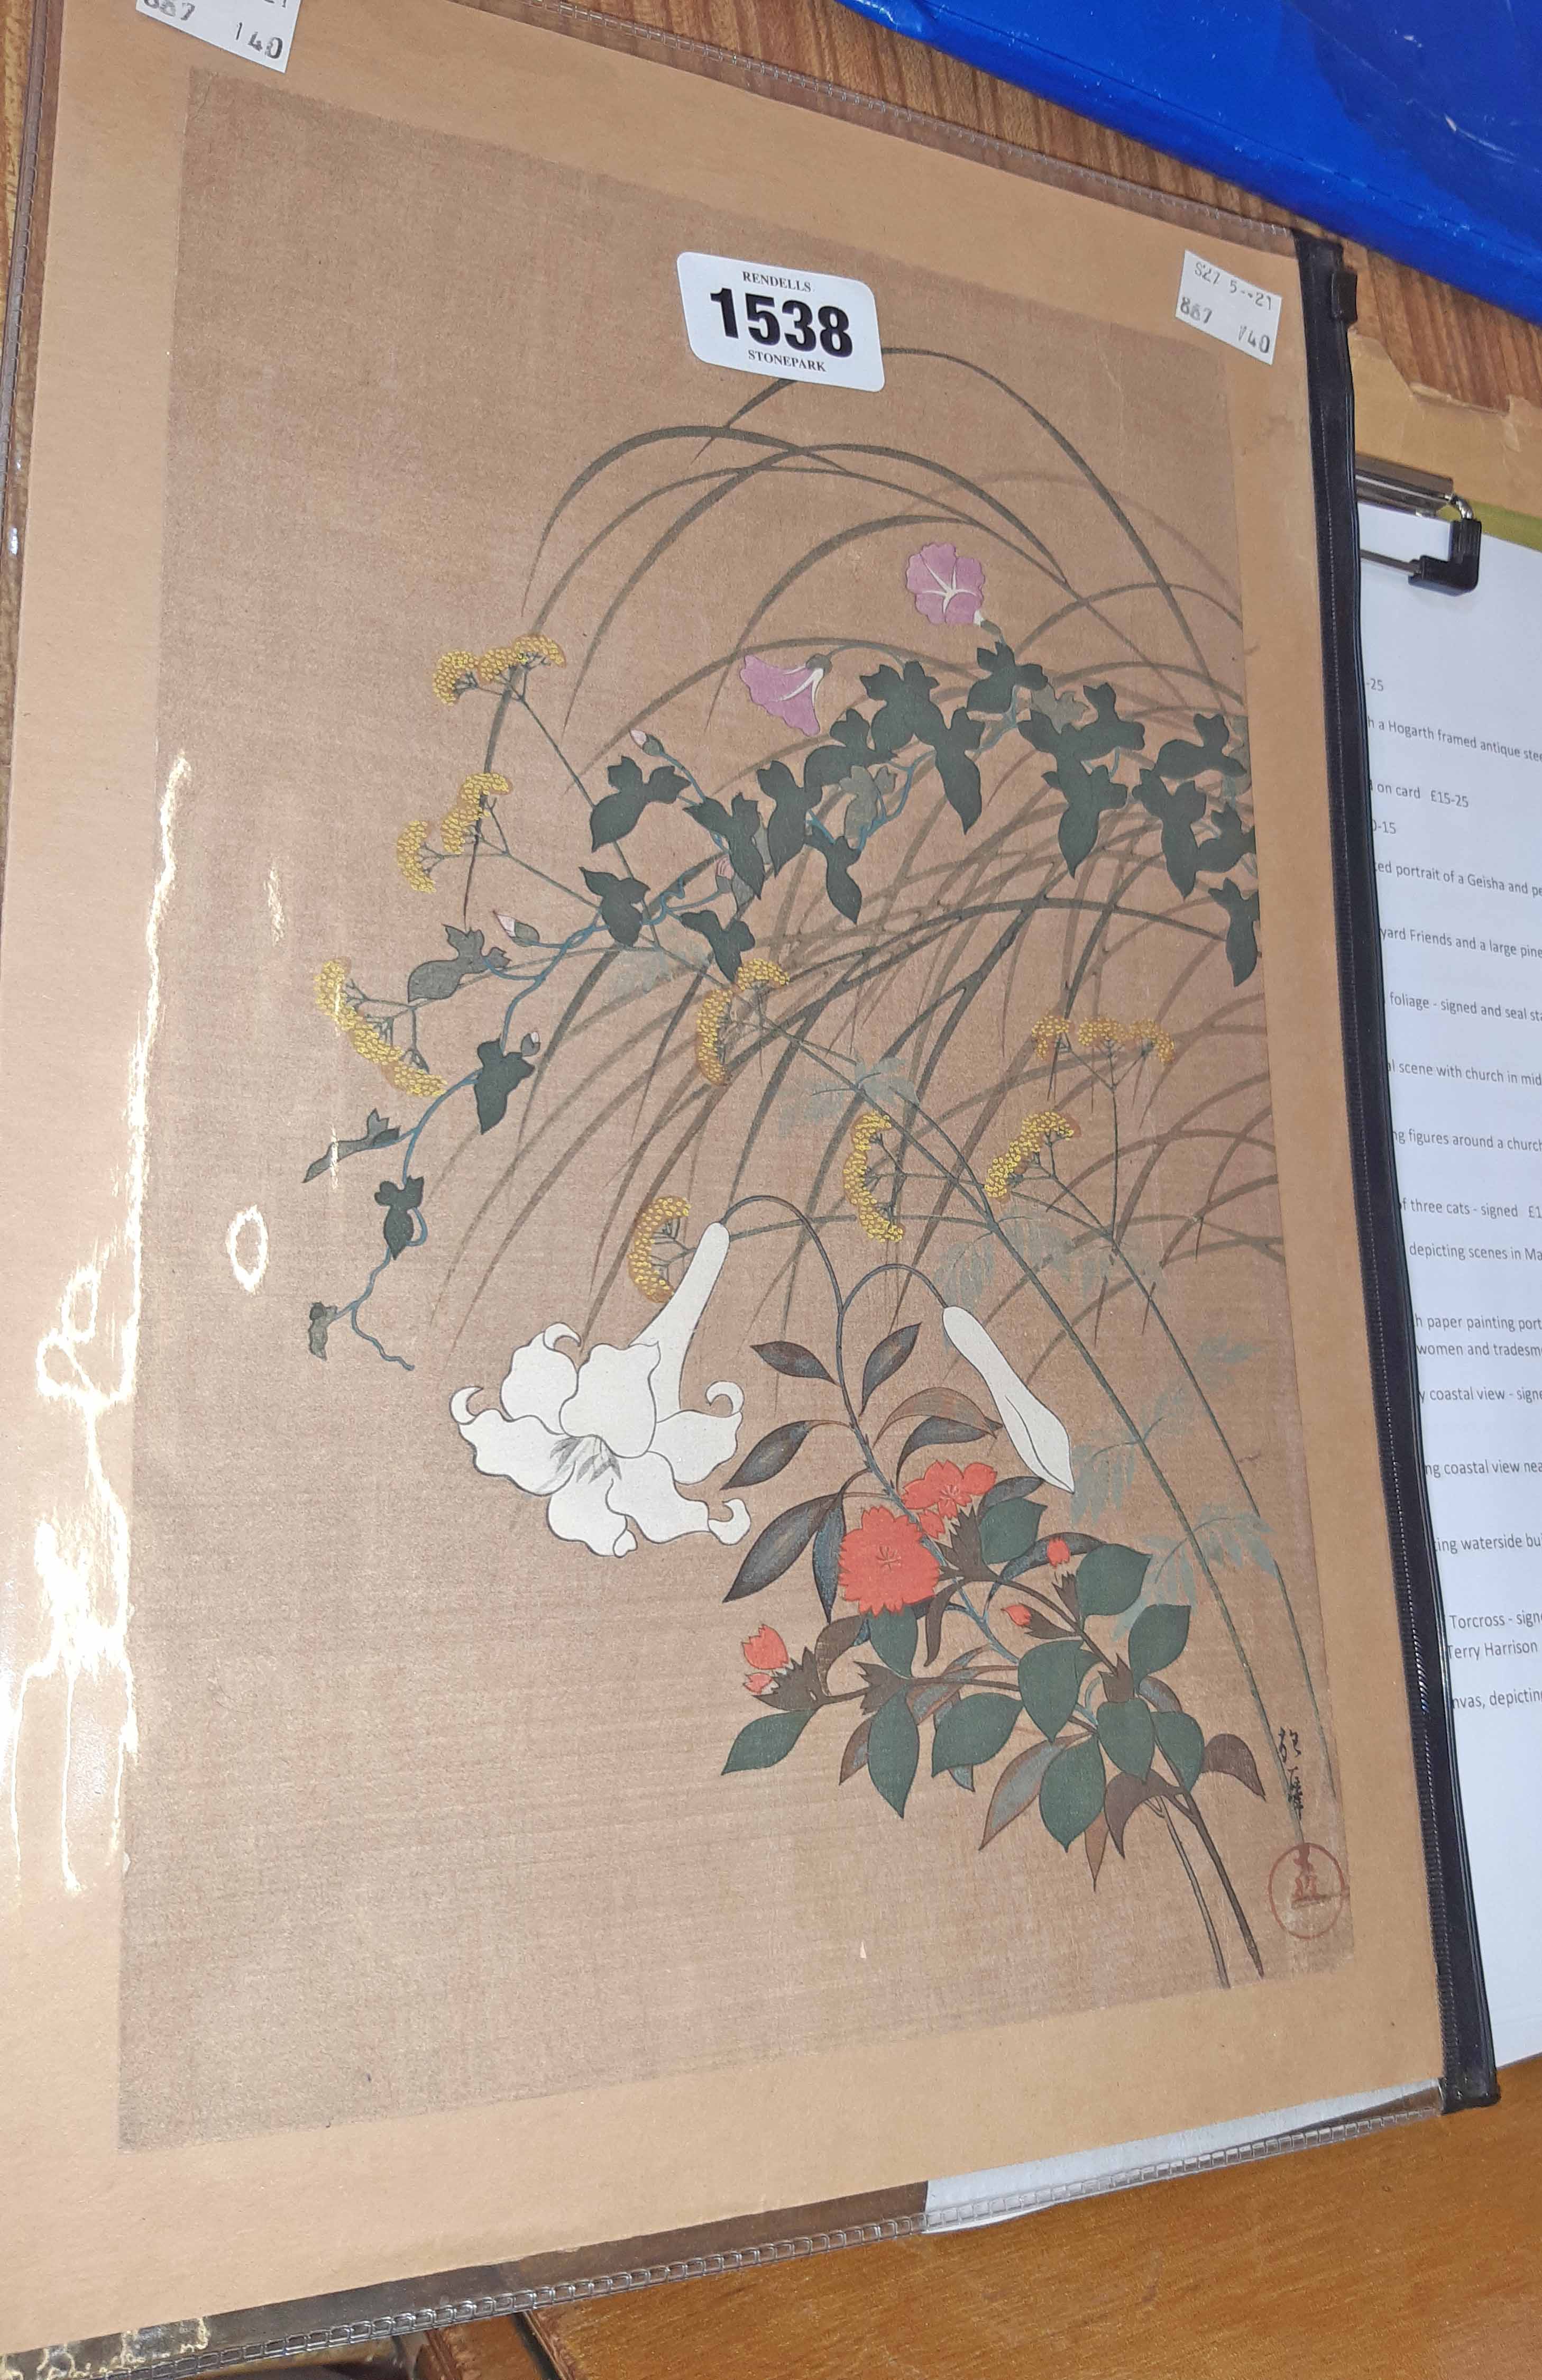 An unframed Oriental watercolour, depicting flowers and foliage - signed and seal stamped